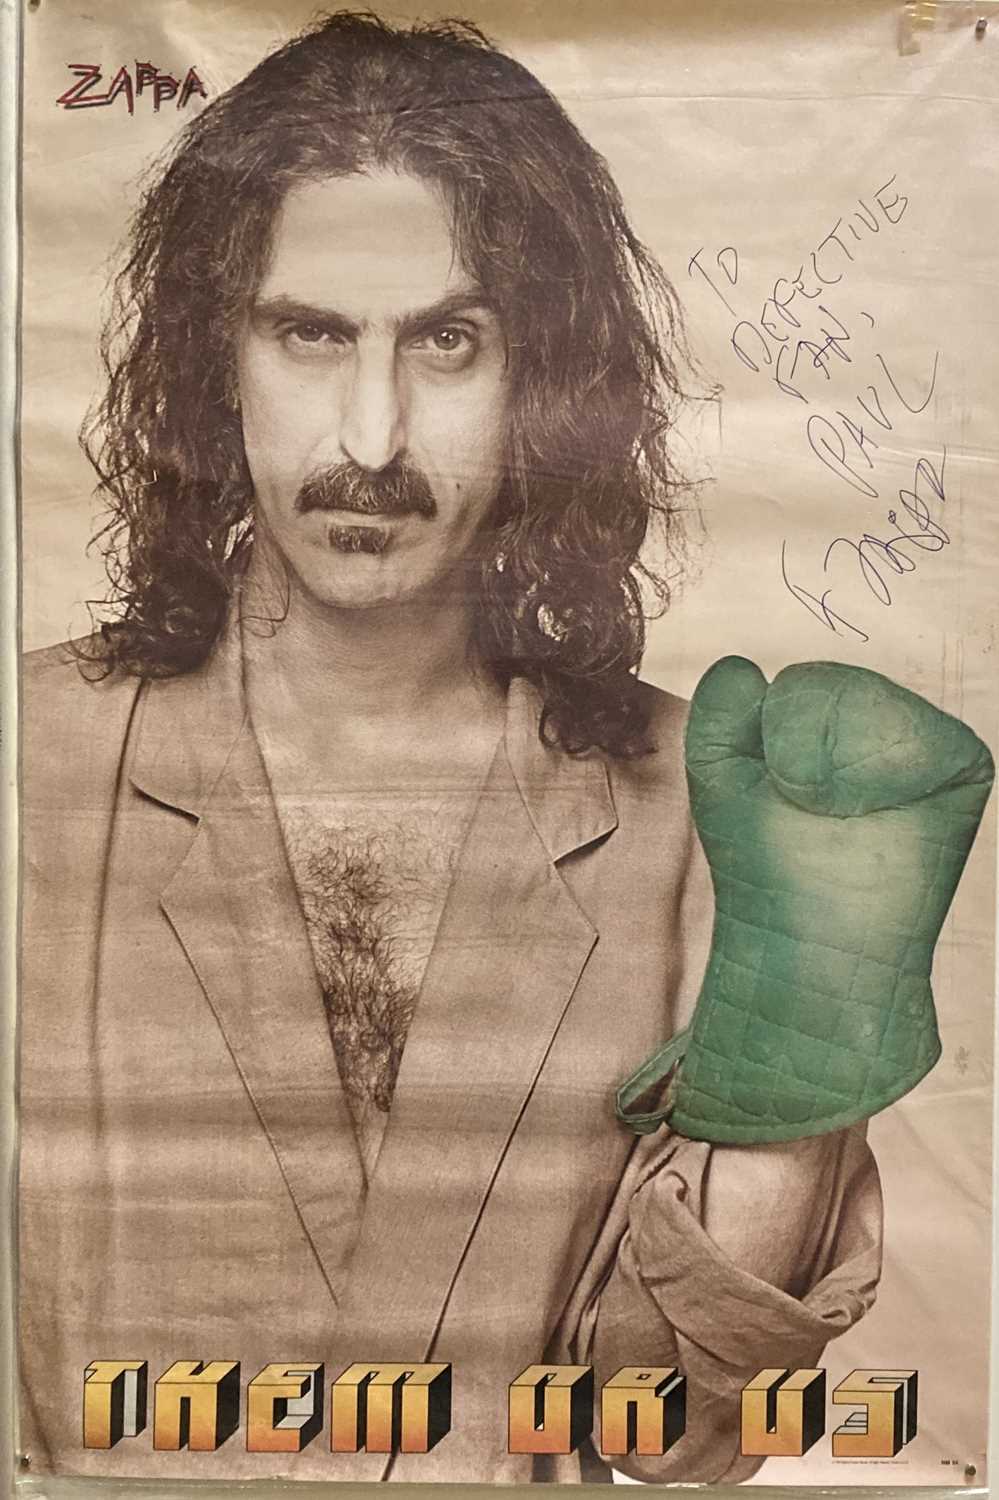 Lot 293 - FRANK ZAPPA SIGNED POSTER.